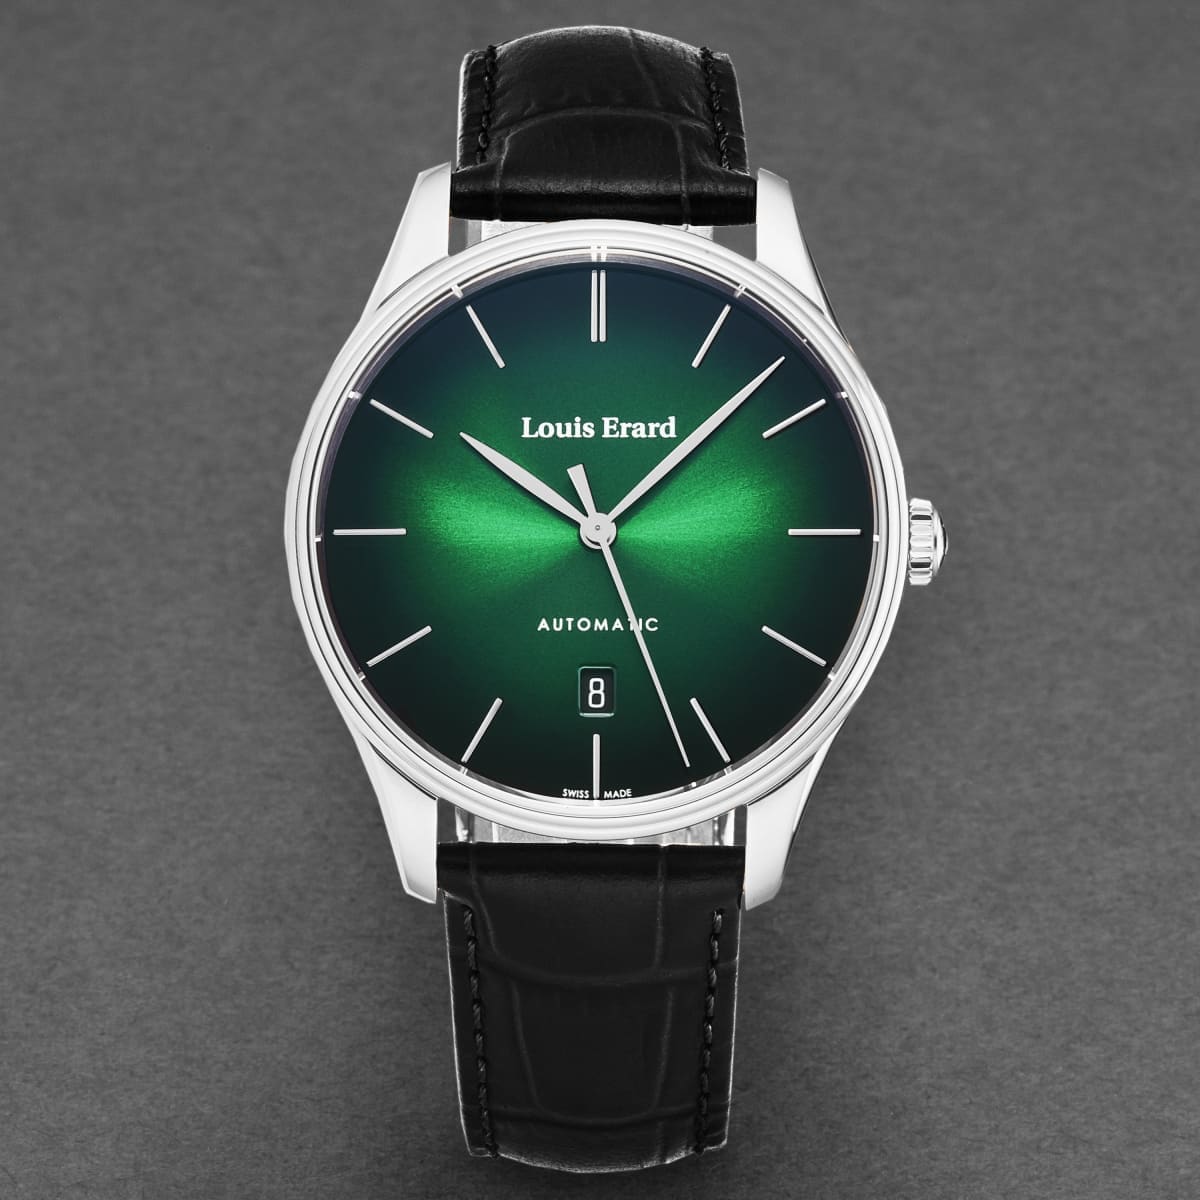 Louis Erard Men’s ’Heritage’ Green/Black Dial Black Leather Strap Automatic Watch 69287AA69.BAAC82 - On sale